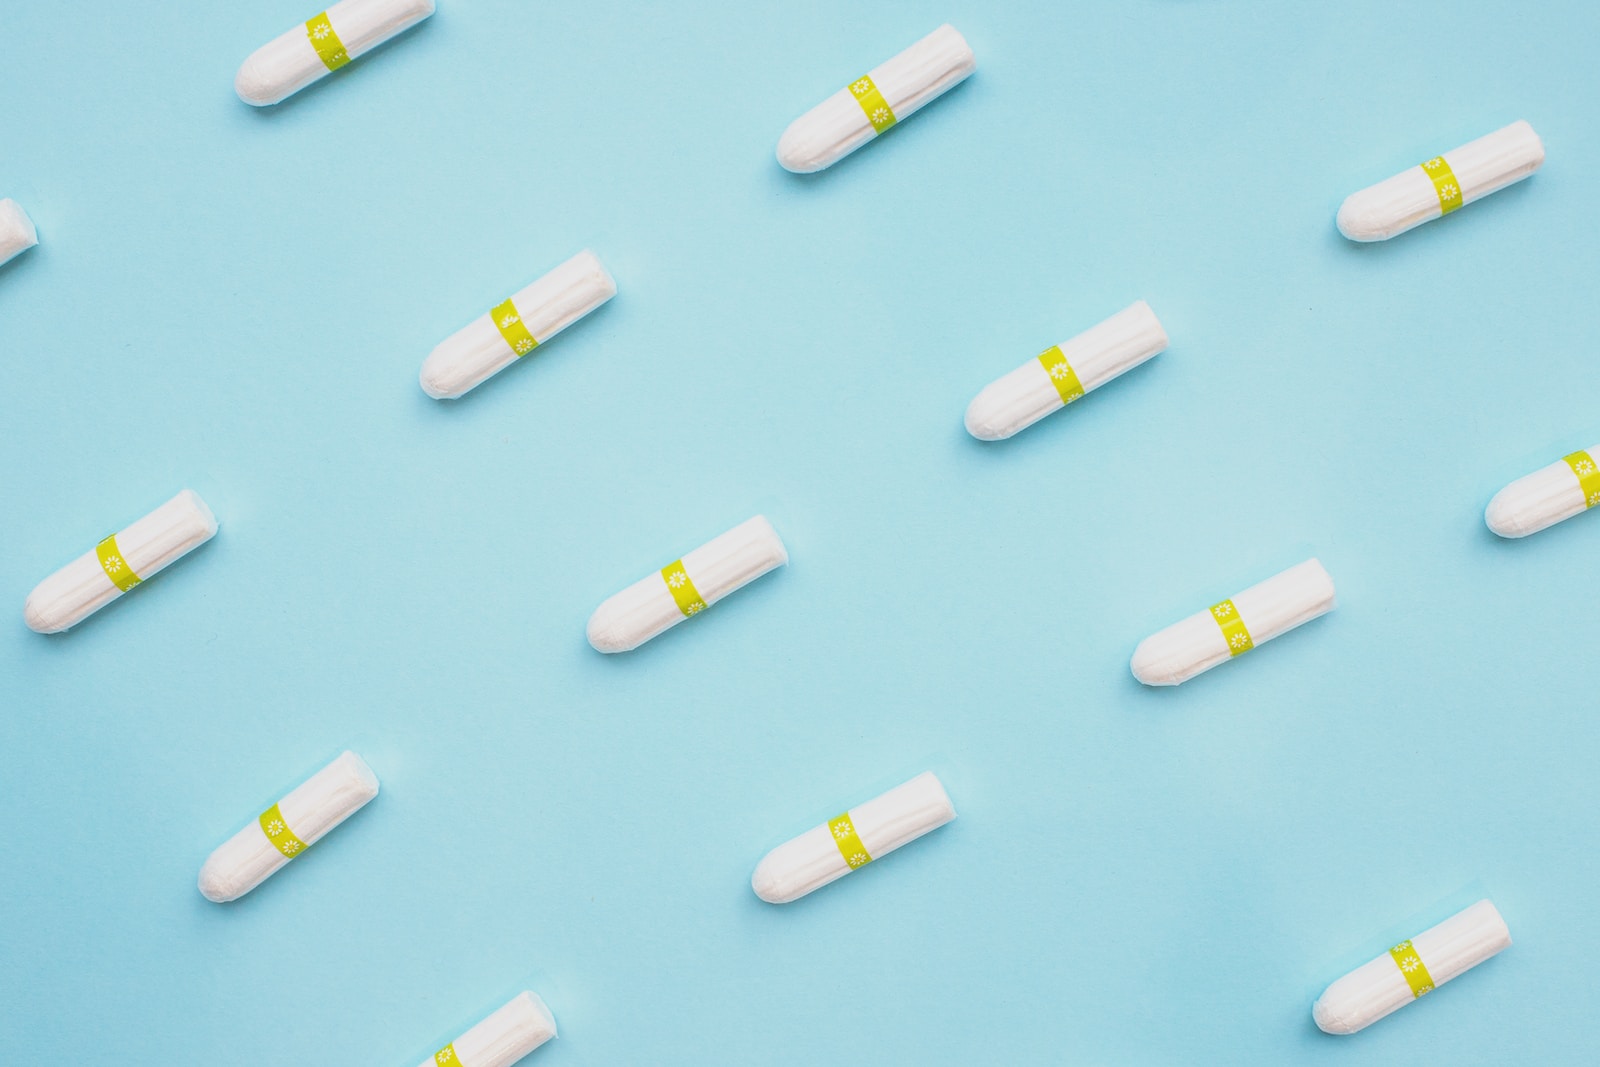 white and yellow medication tampon